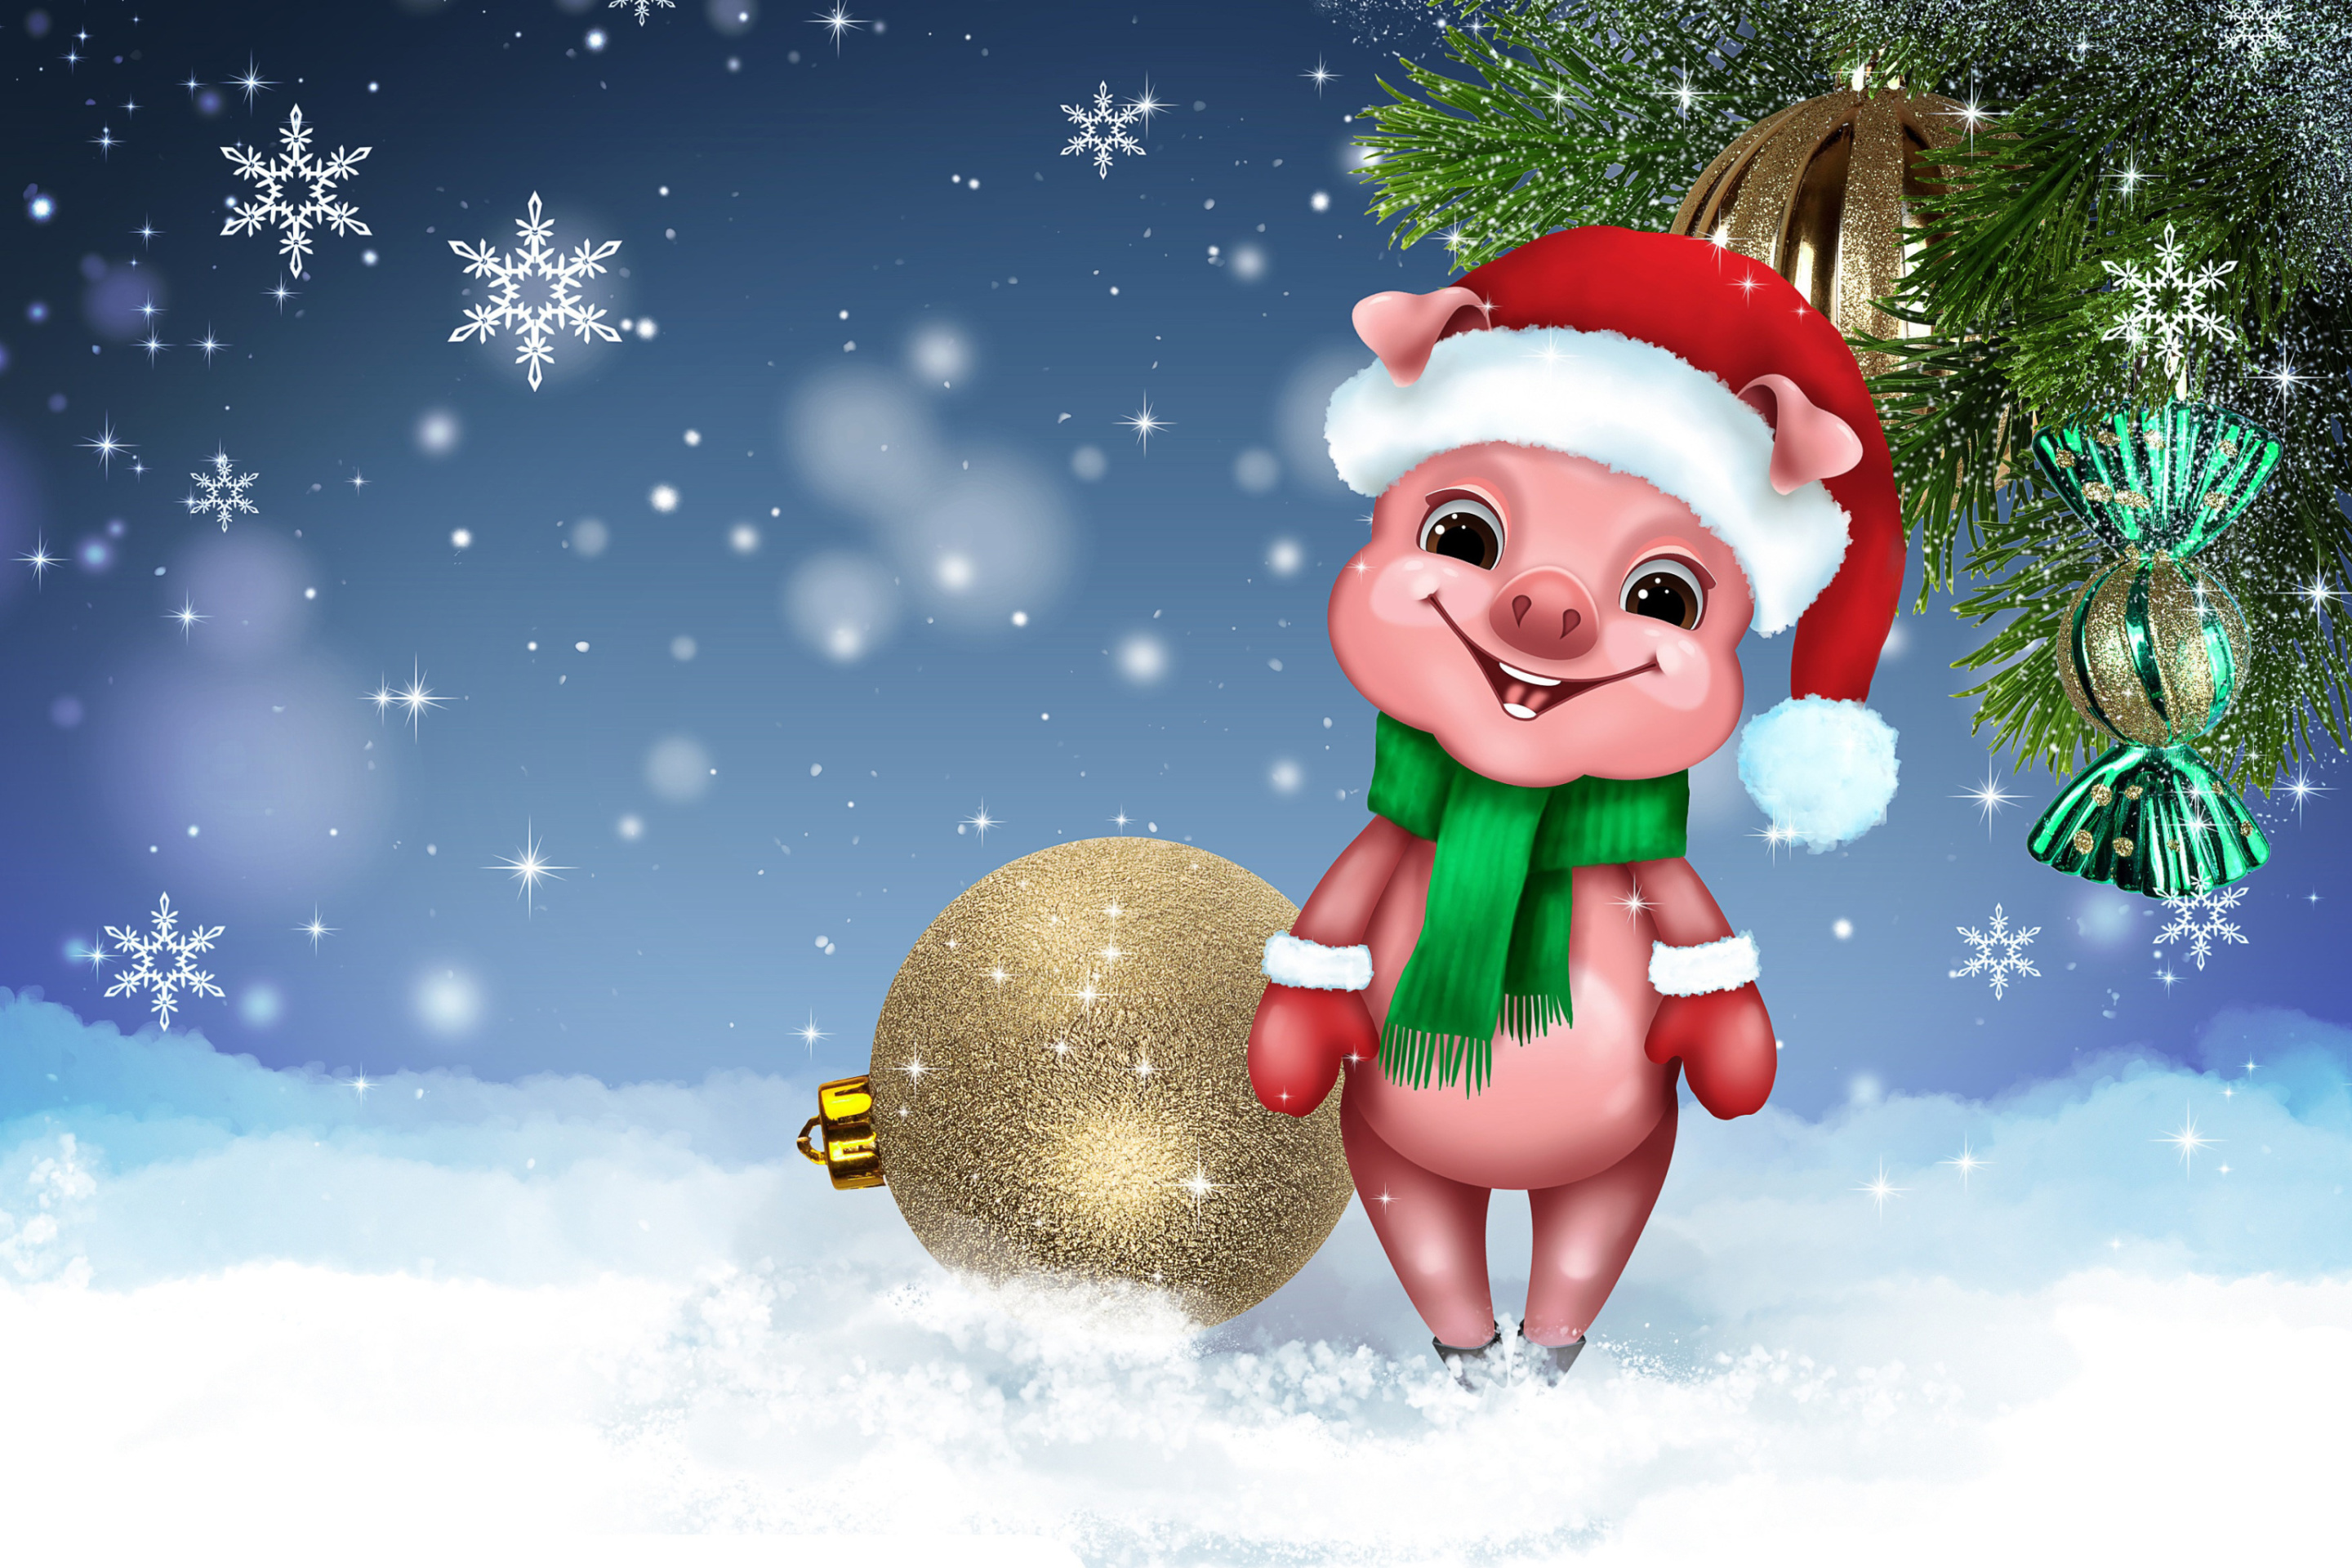 2019 Pig New Year Chinese Astrology wallpaper 2880x1920